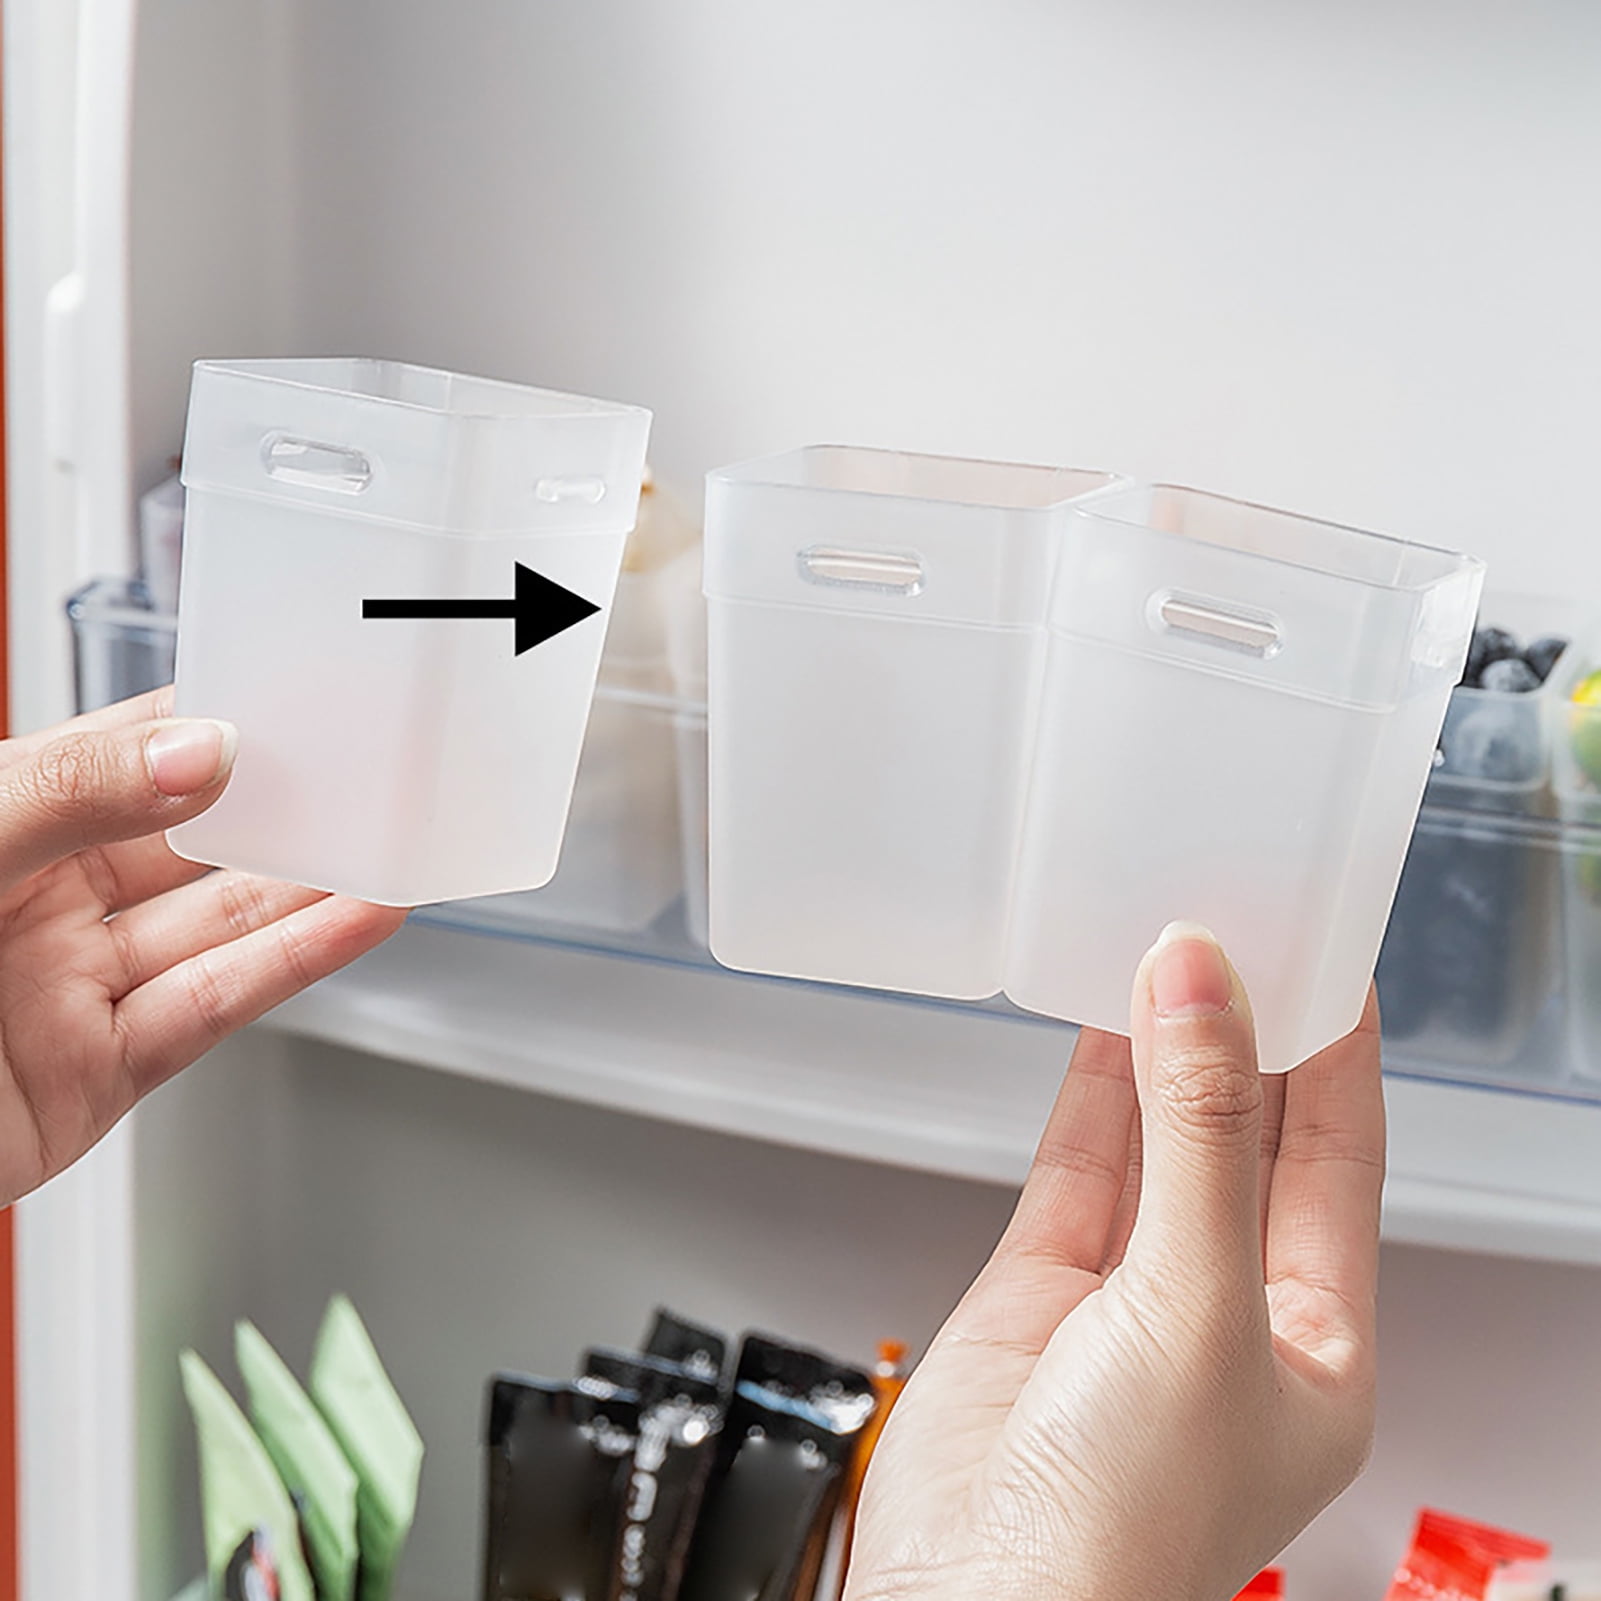 These Popular Fridge and Pantry Bins Are an 'Organizer's Dream